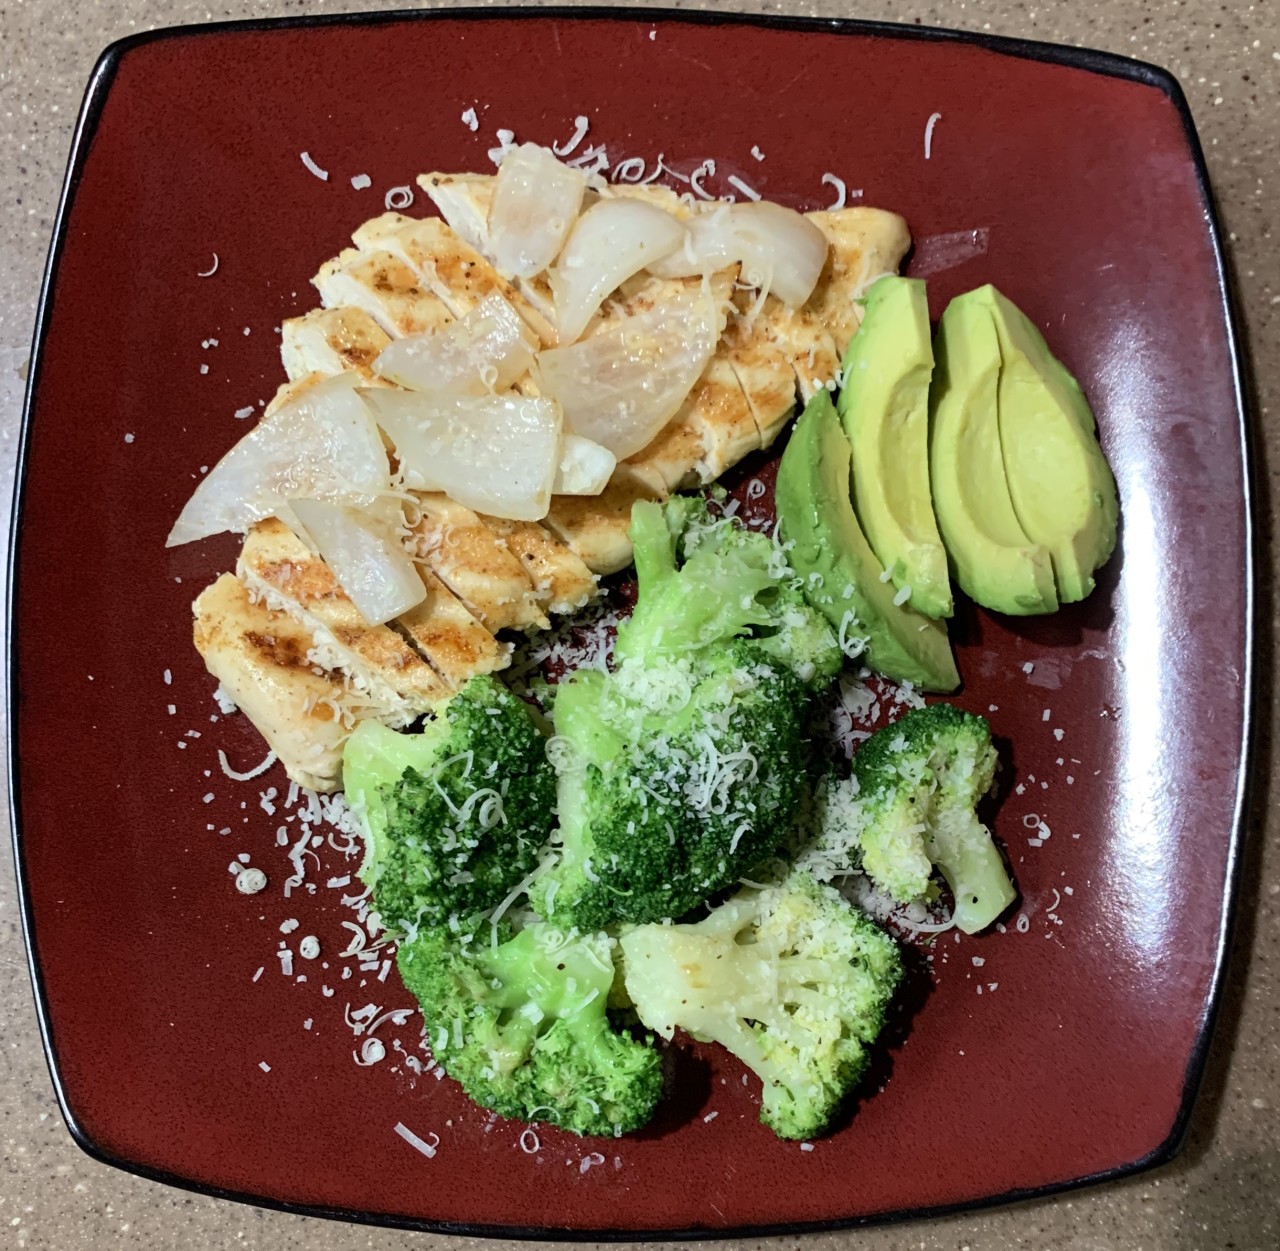 <a class="bx-tag" rel="tag" href="https://streetloc.com/view-channel-profile/whatsfordinner"><s>#</s><b>whatsfordinner</b></a> Grilled Chicken with Onions, Parmesan Broccoli, and Avocado